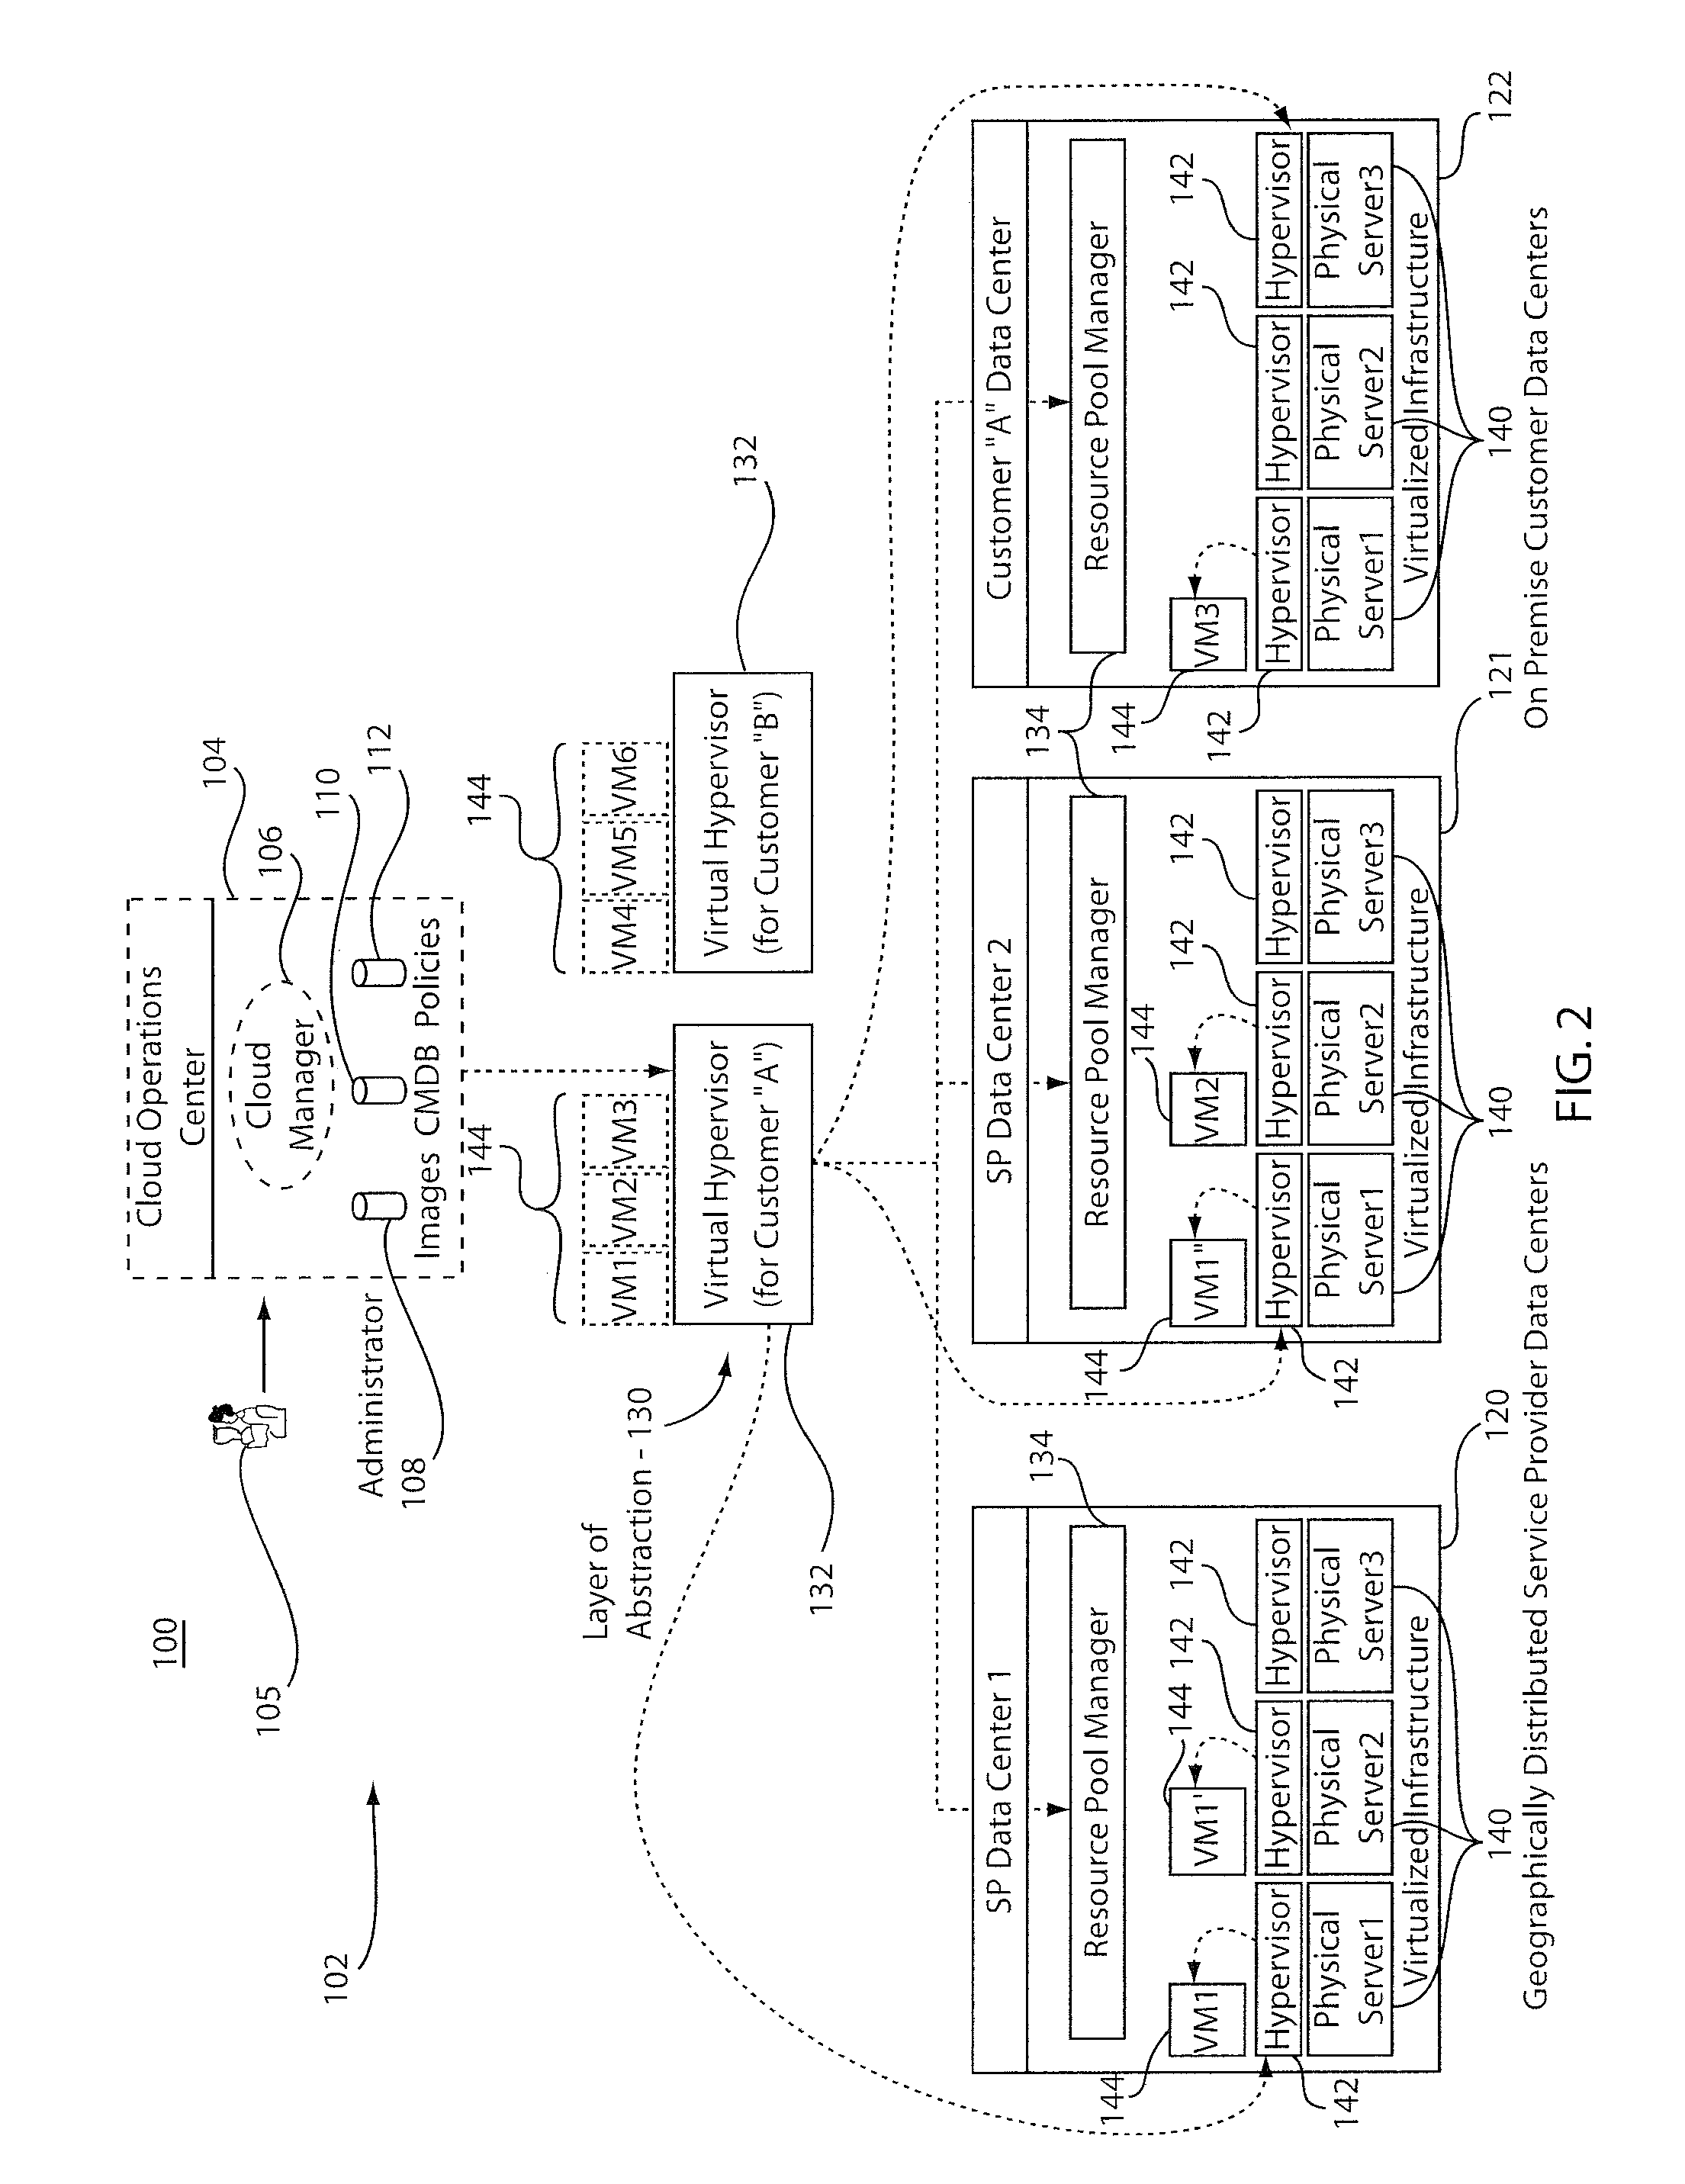 Method and system for abstracting non-functional requirements based deployment of virtual machines